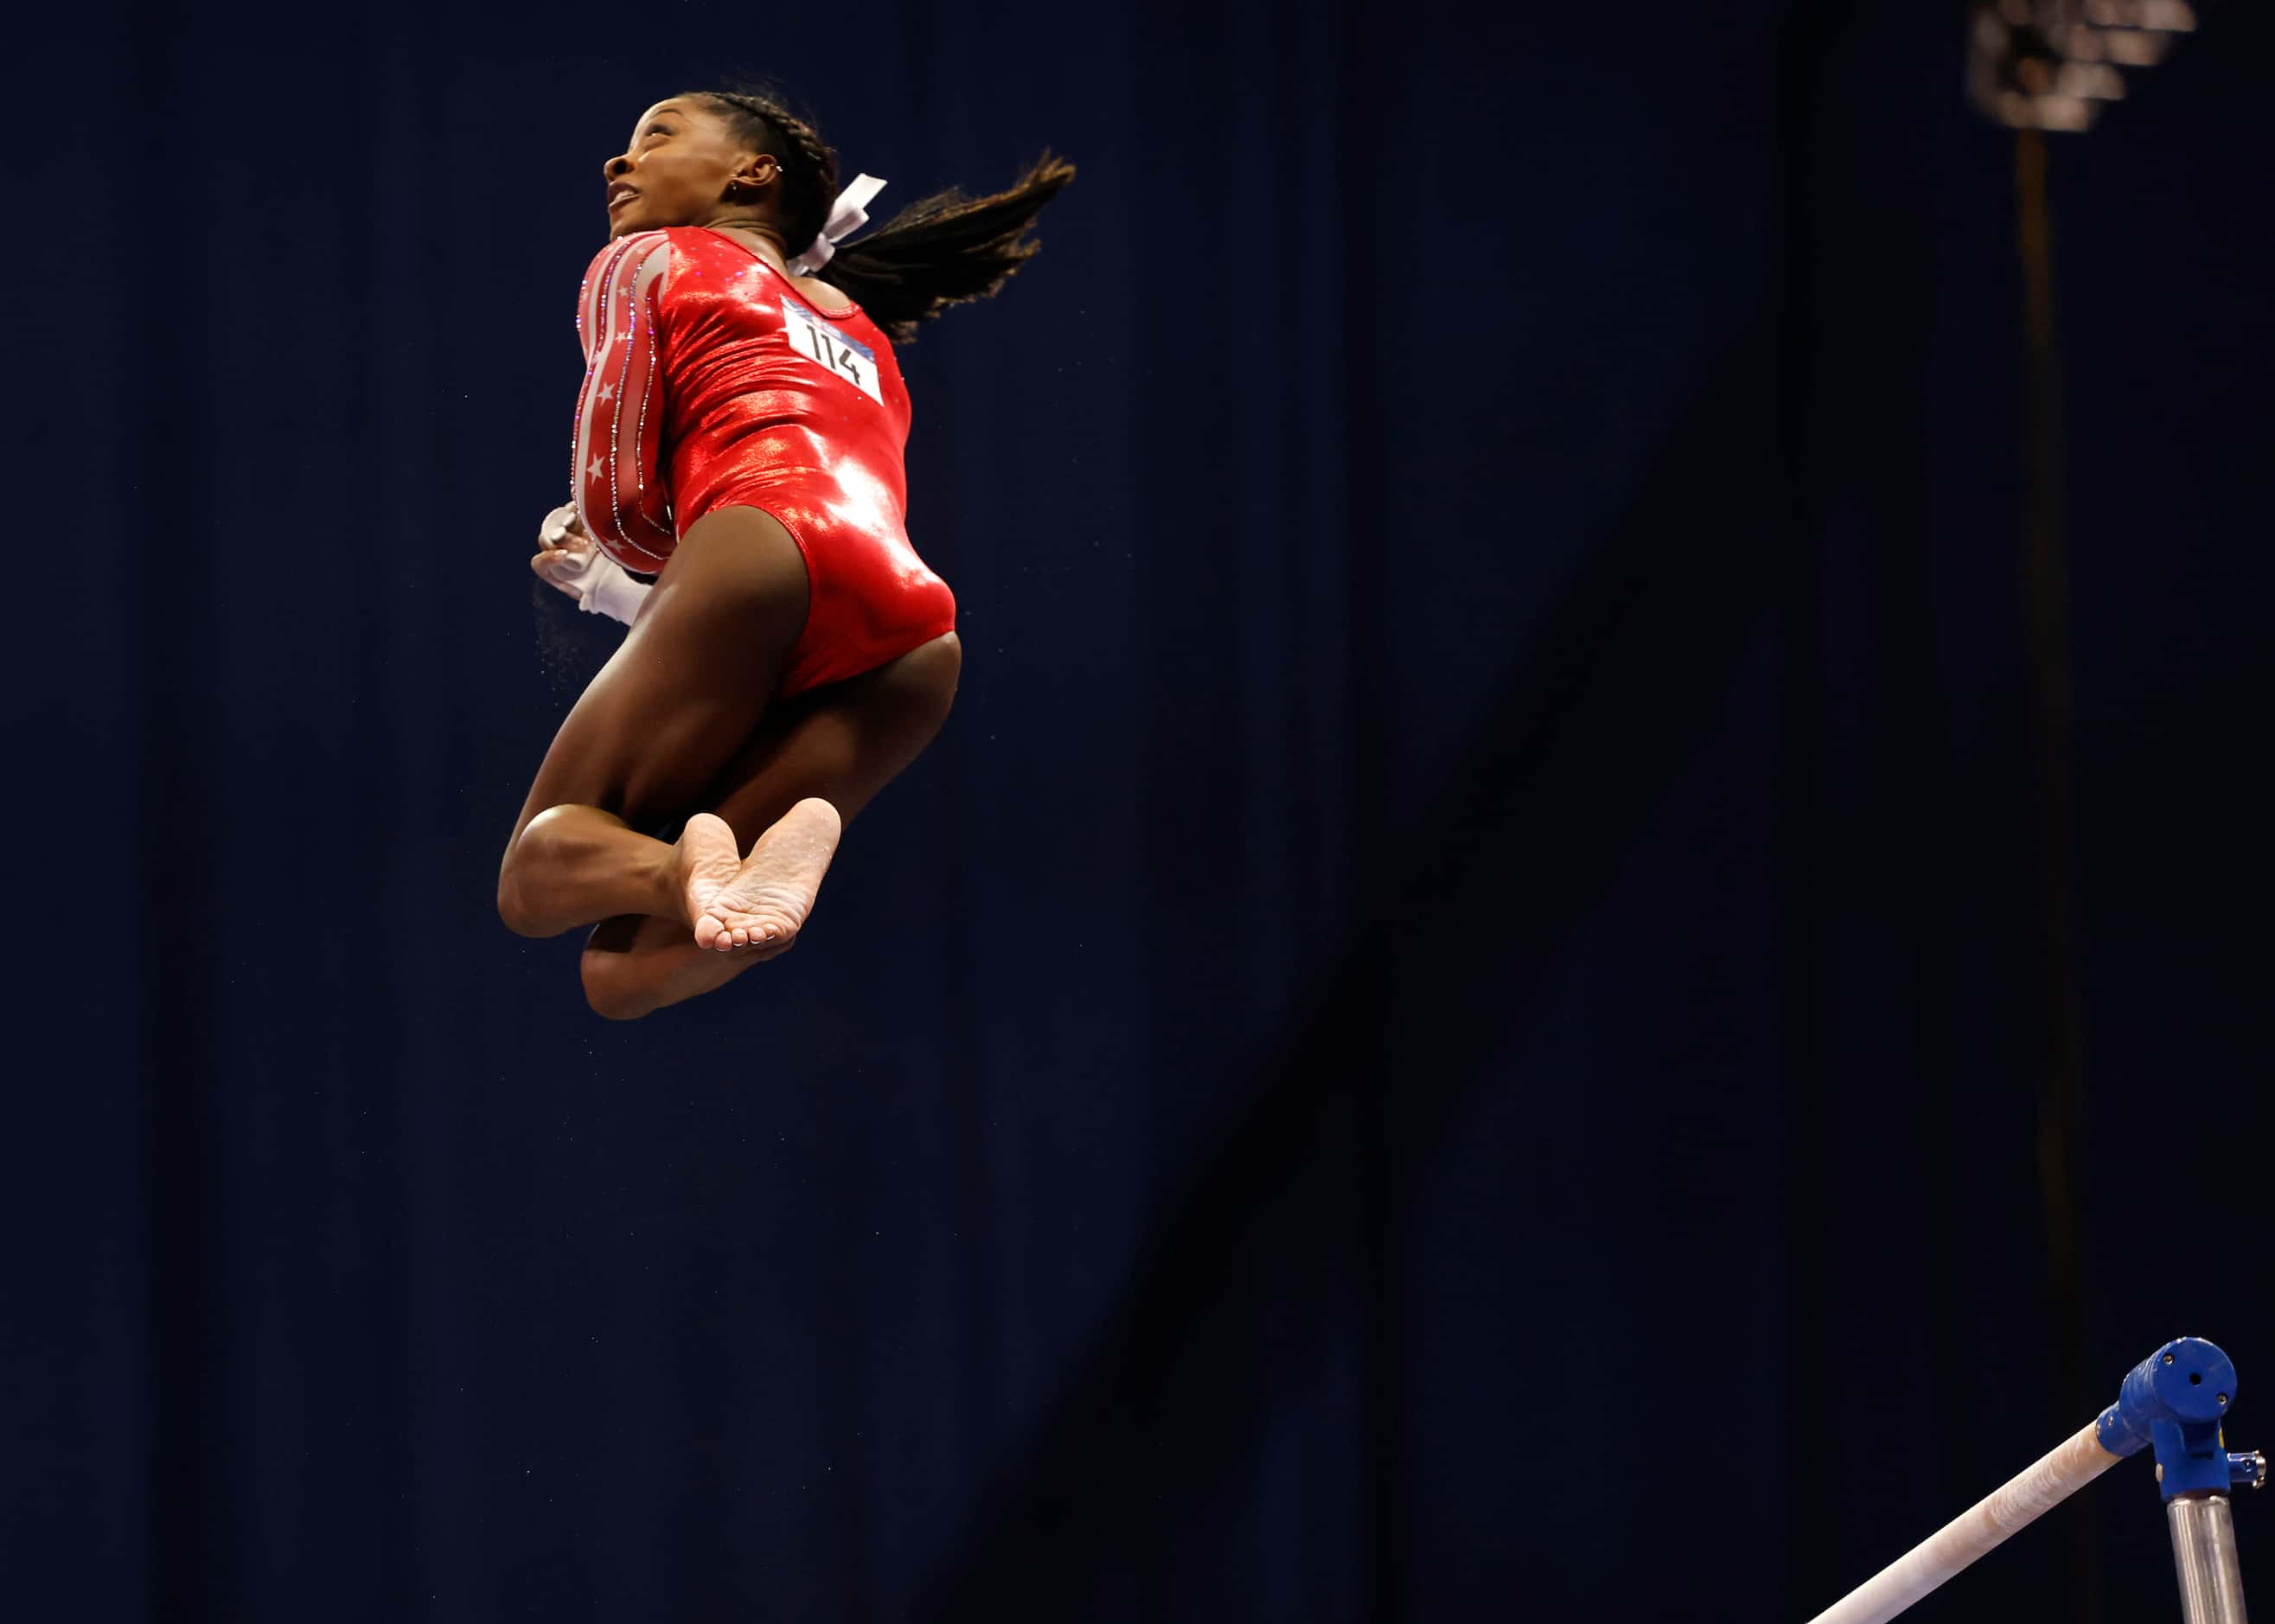 Simone Biles competes on the uneven bars during day 2 of the women's 2021 U.S. Olympic...